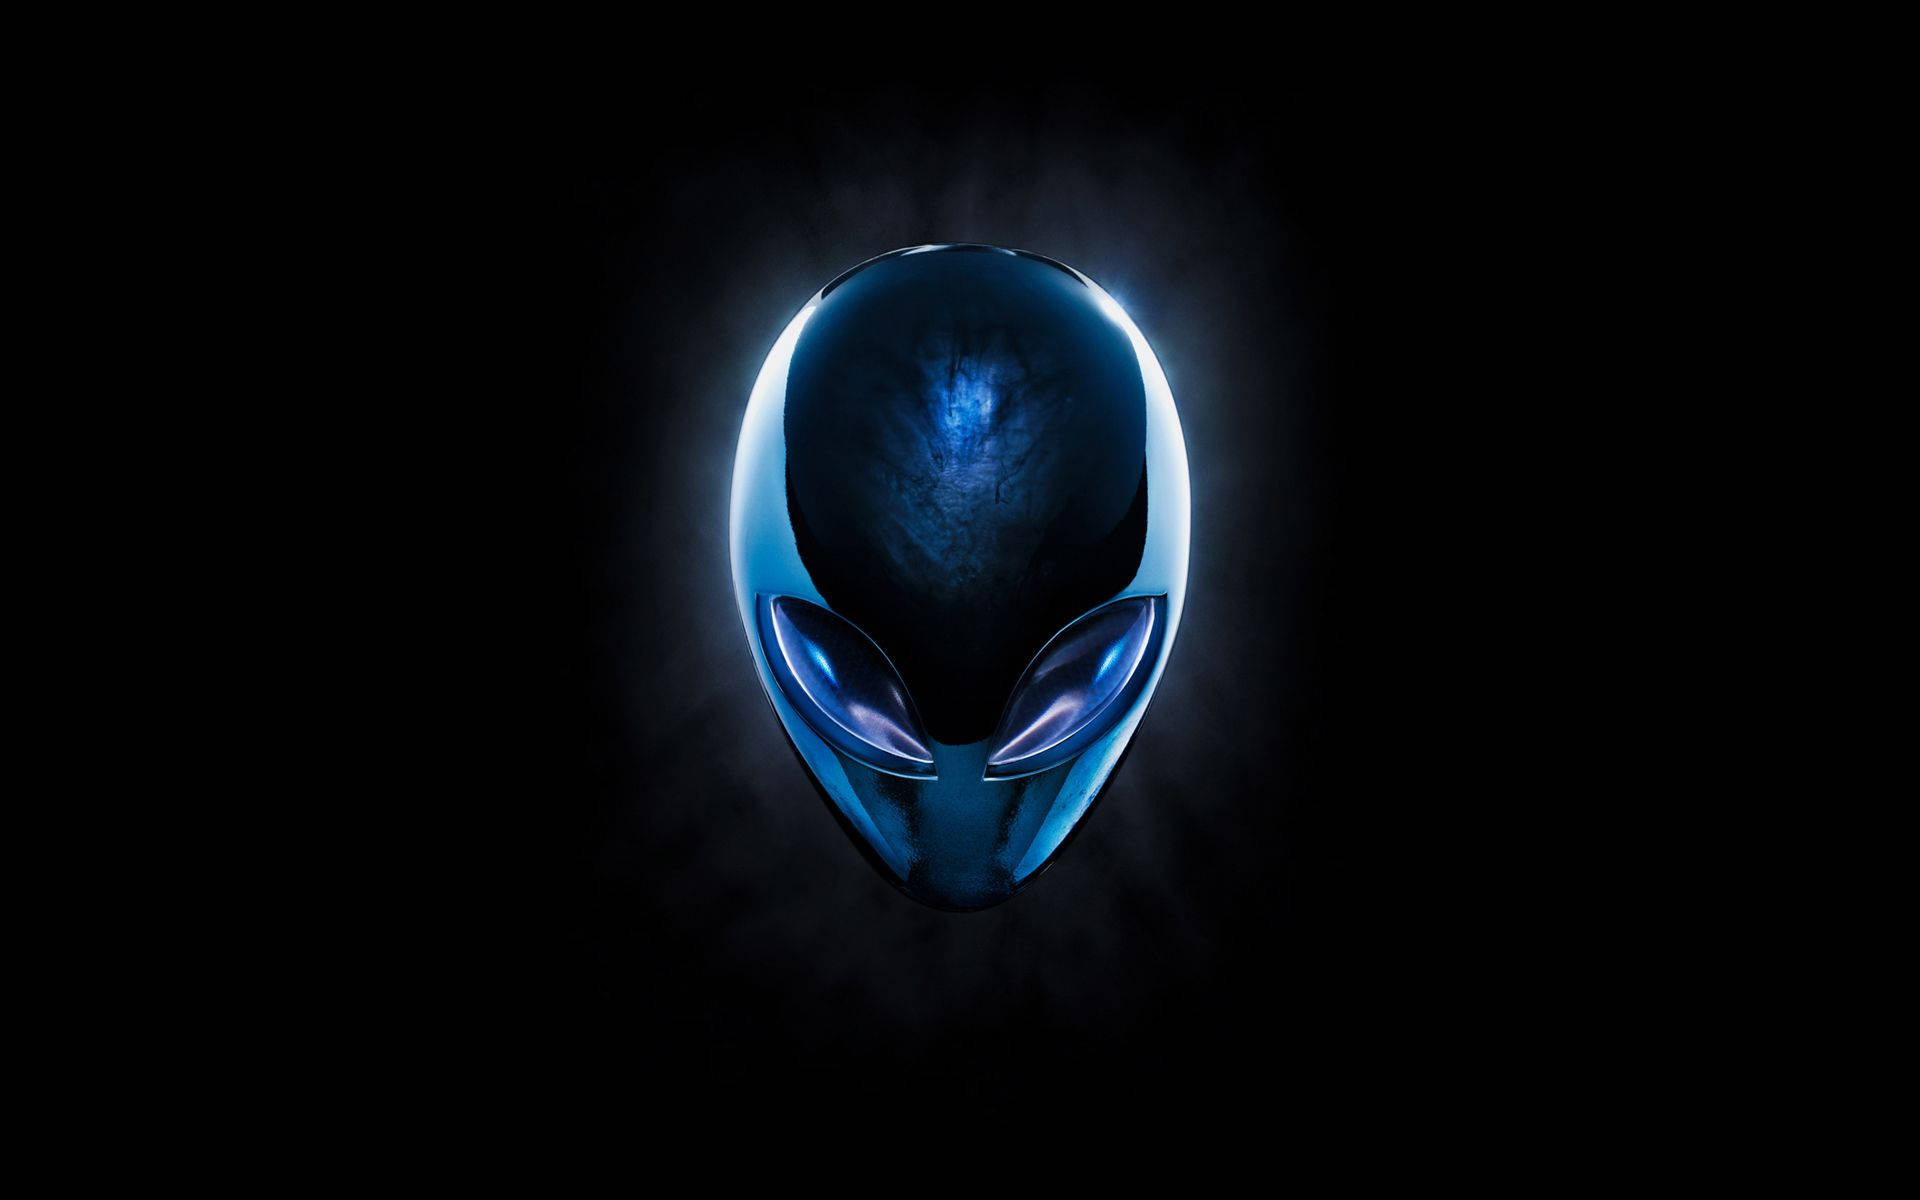 Alienware 1920X1200 Wallpaper and Background Image